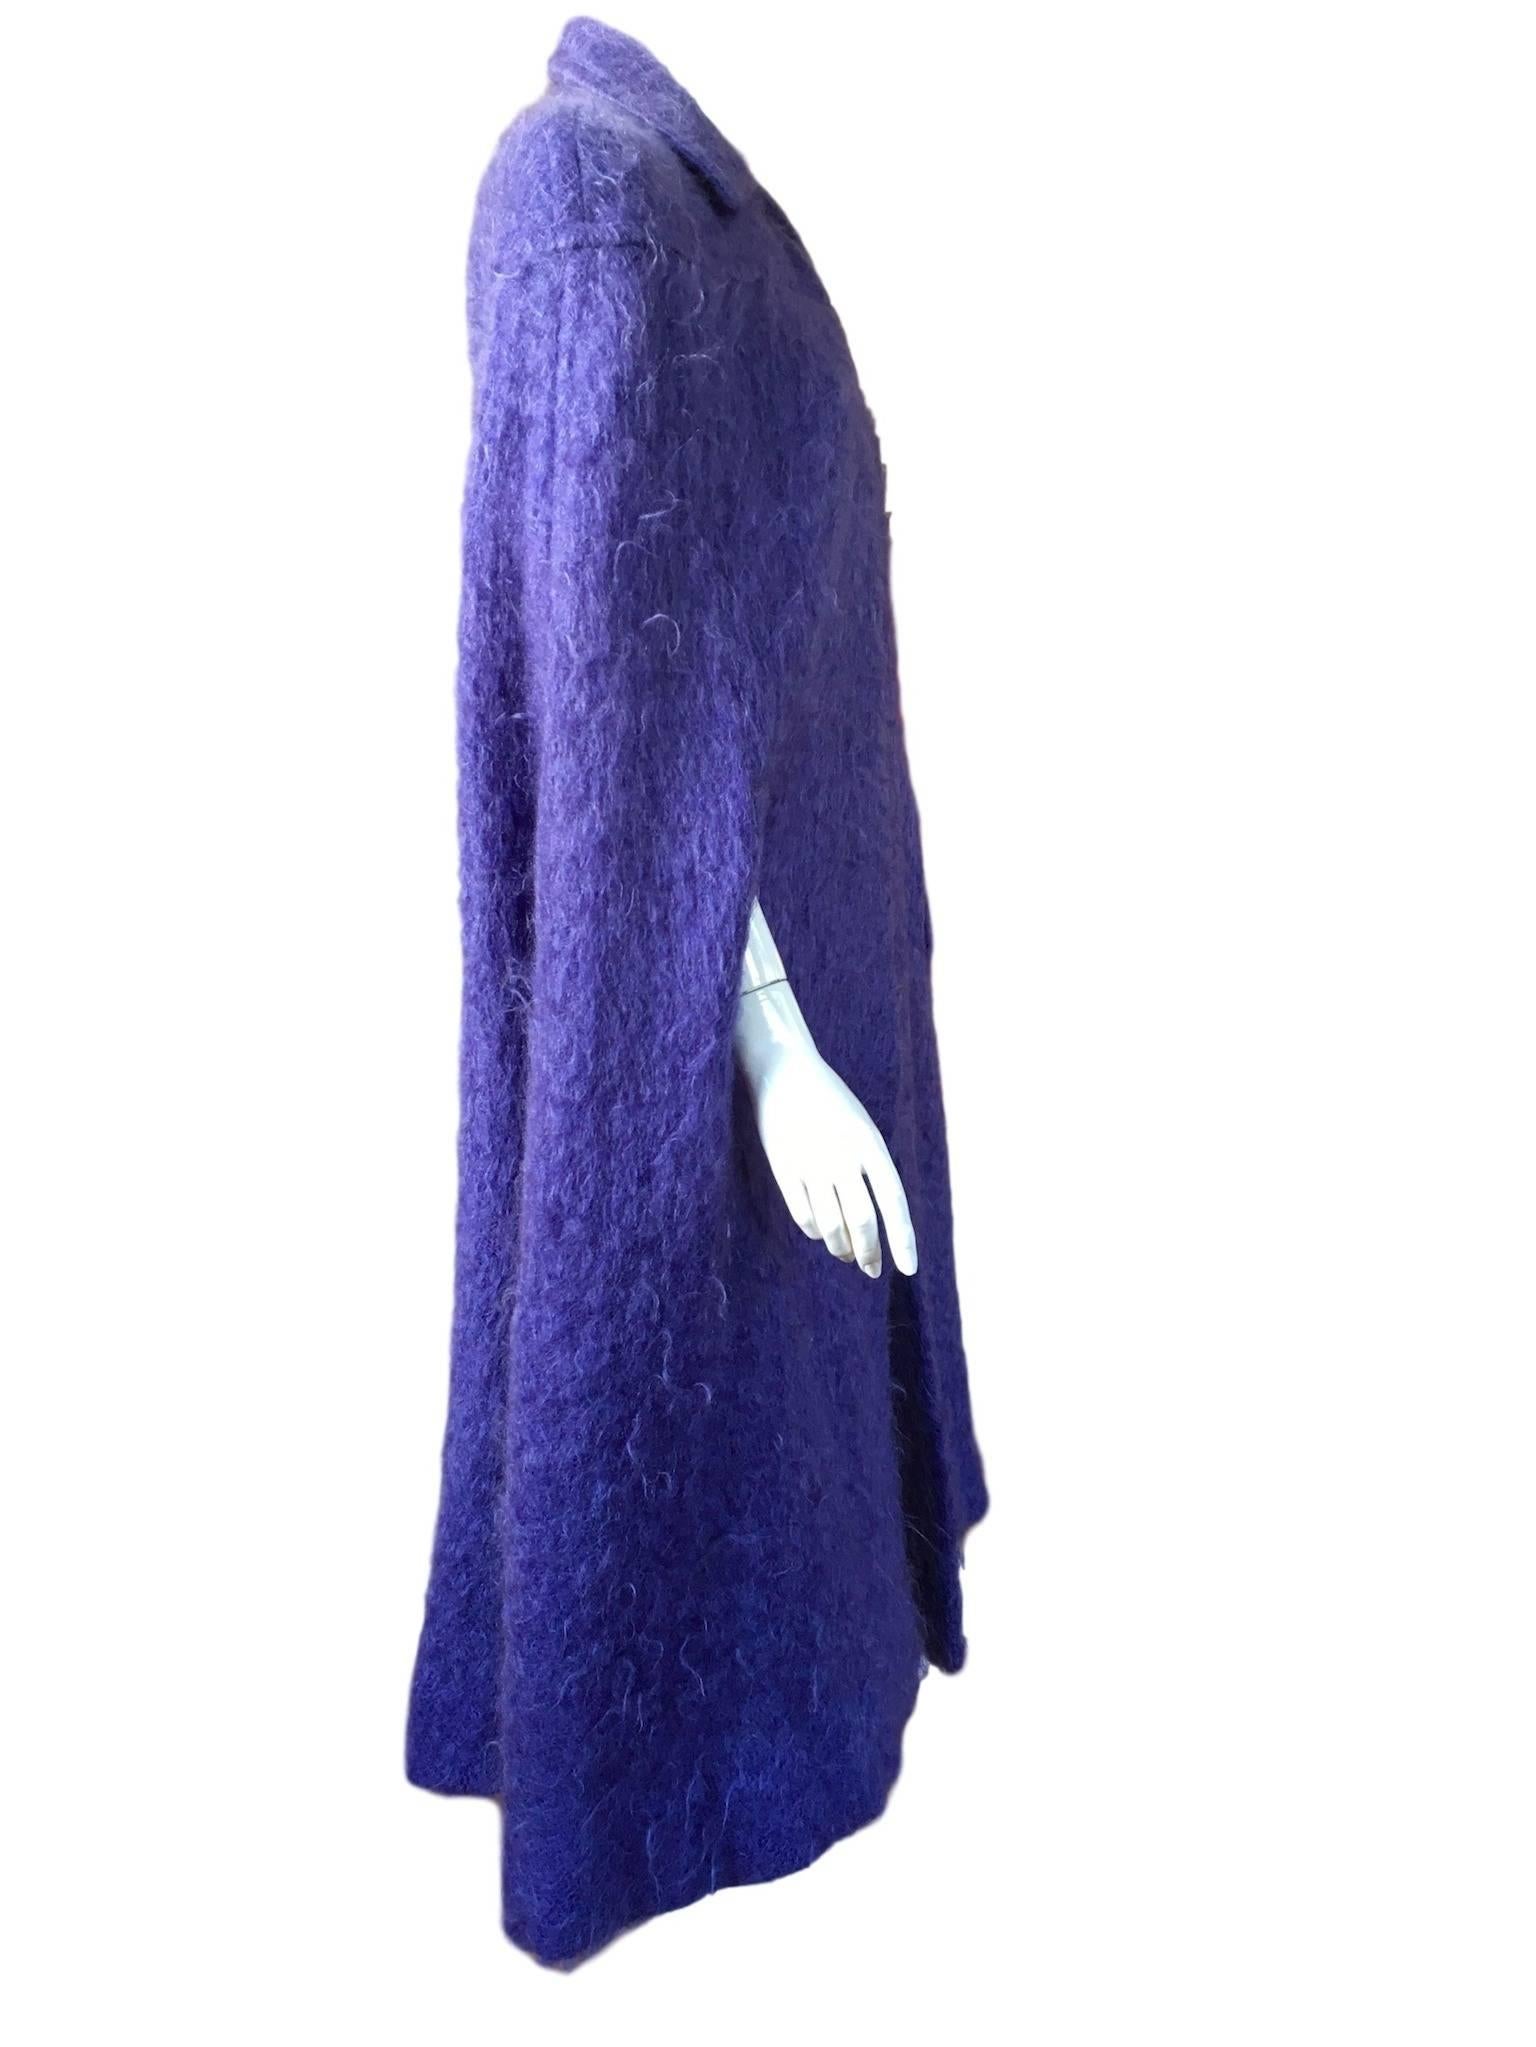 Murray Arbeid vintage 1970s lavender soft mohair cape, with popper neck fastening and has arm holes.

Size small to medium measures 18 inches across shoulders and 47 inches length from top of collar to hem.